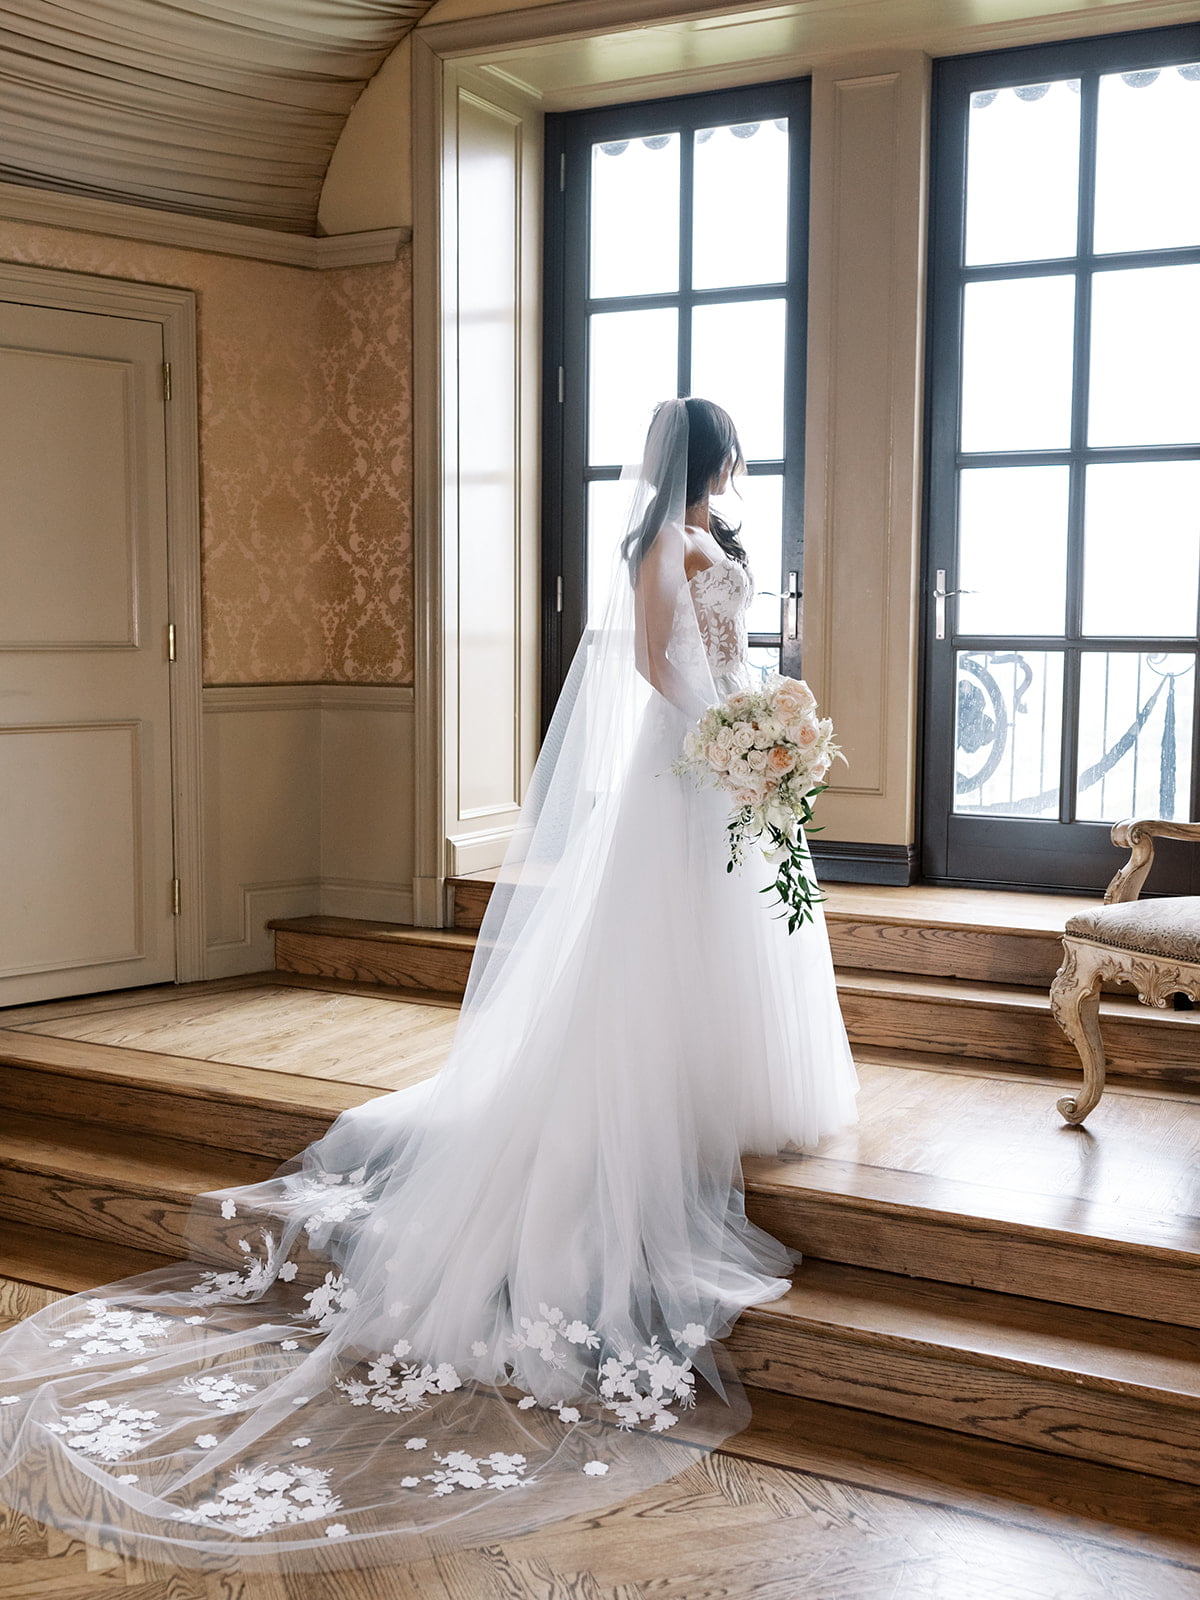 Kathryn christoforatos wearing New Fiona Gown and Matching veil